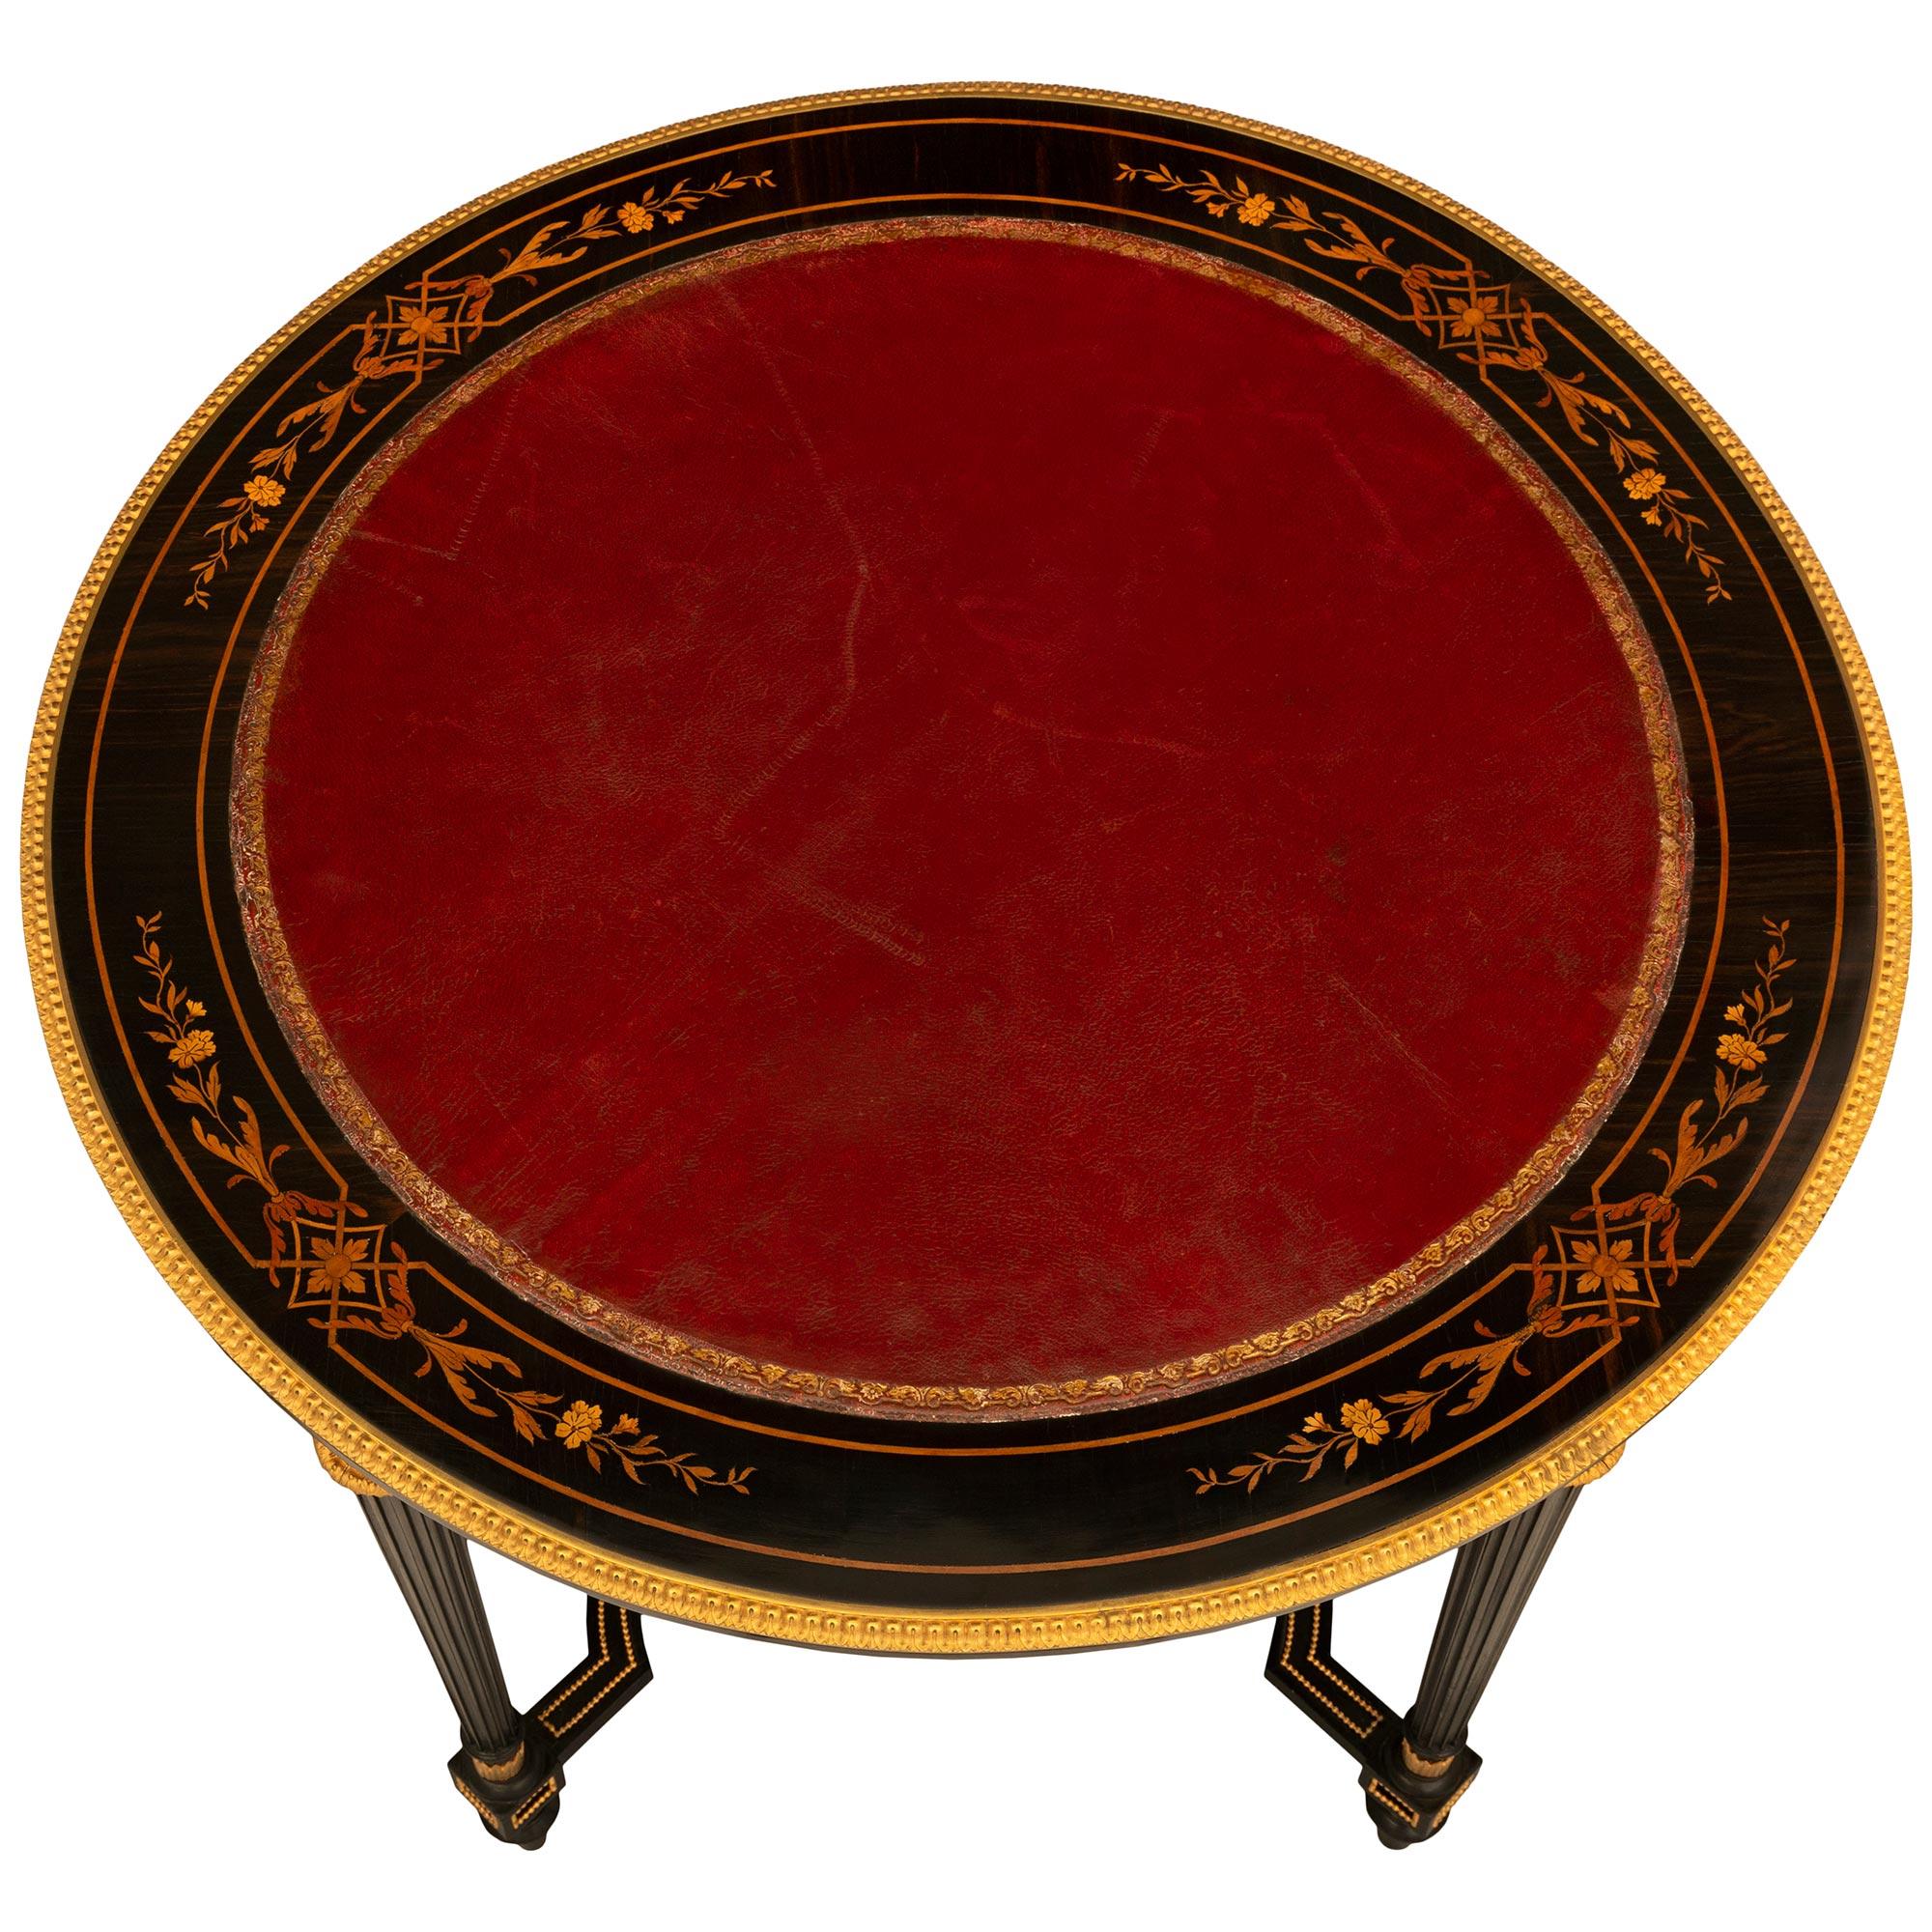 A striking French 19th century Louis XVI style Napoleon III period ebonized fruitwood, exotic woods, ormolu and leather center table. The table is raised by elegant circular fluted legs with foliate top caps and fine toupie shaped feet. Each leg